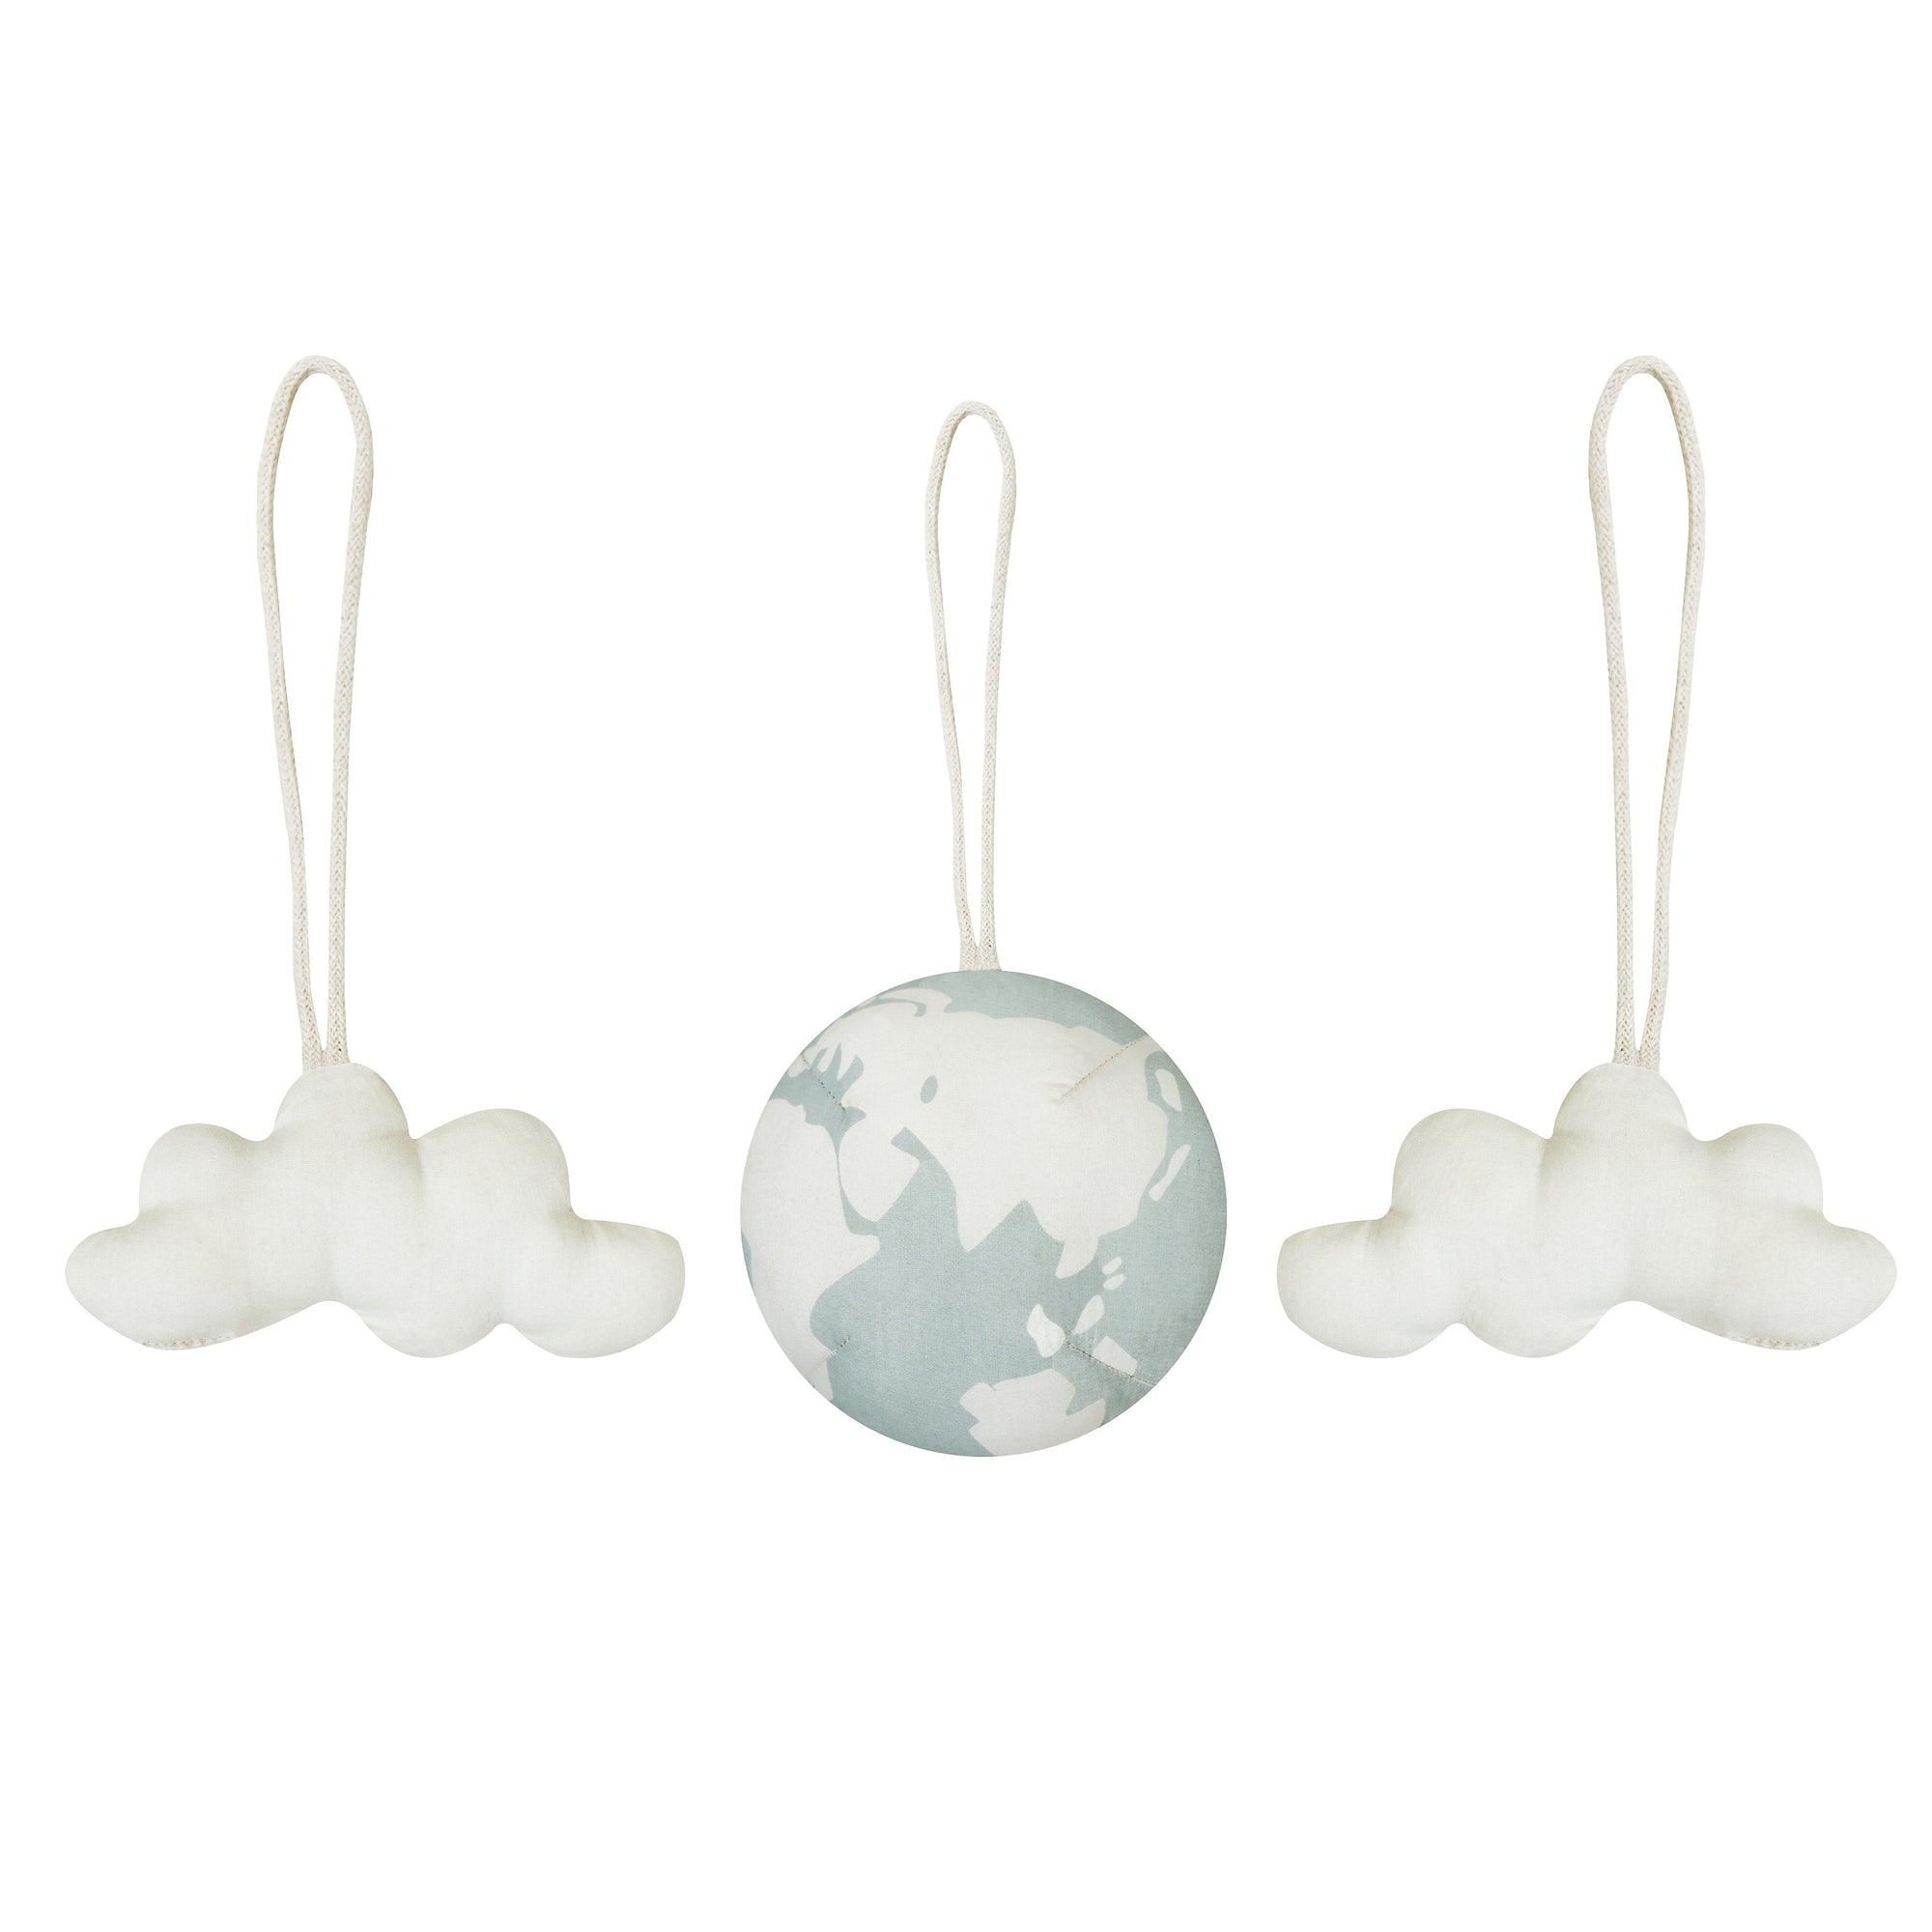 Lorena Canals World Ball Set of 3 Rattle Toy Hangers